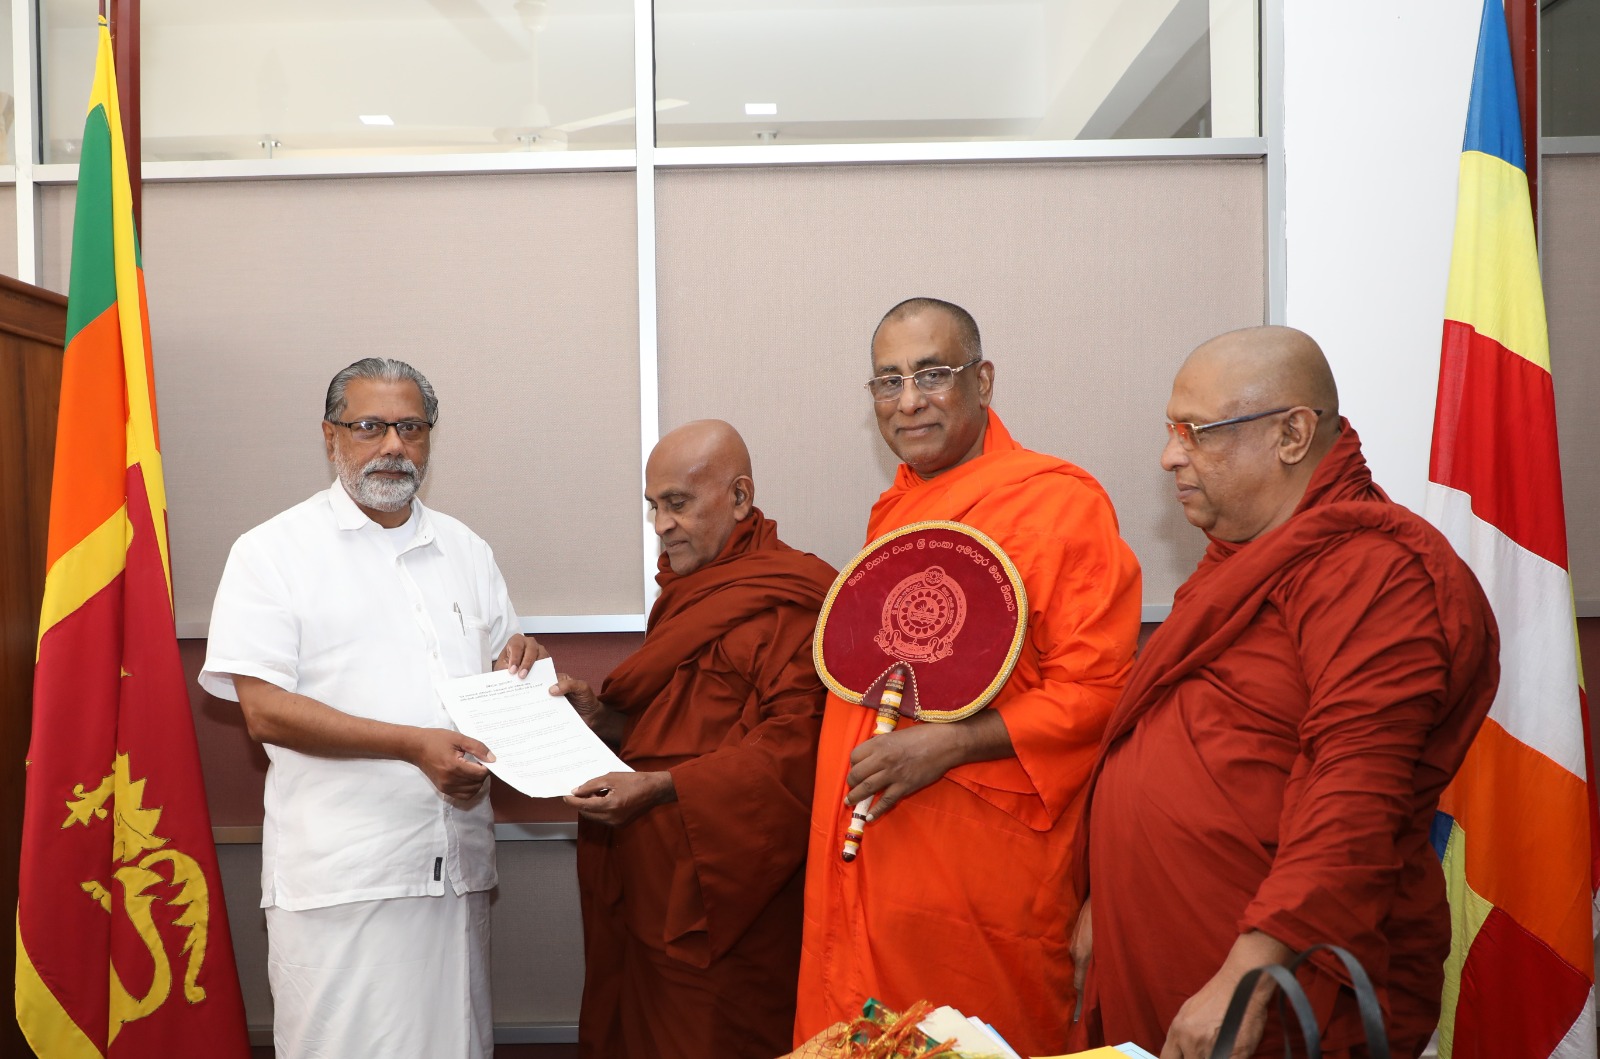 SBSL Monks with Minister of Buddhashasana Religious and Cultural Affairs Hon.Vidura Wickremanayake